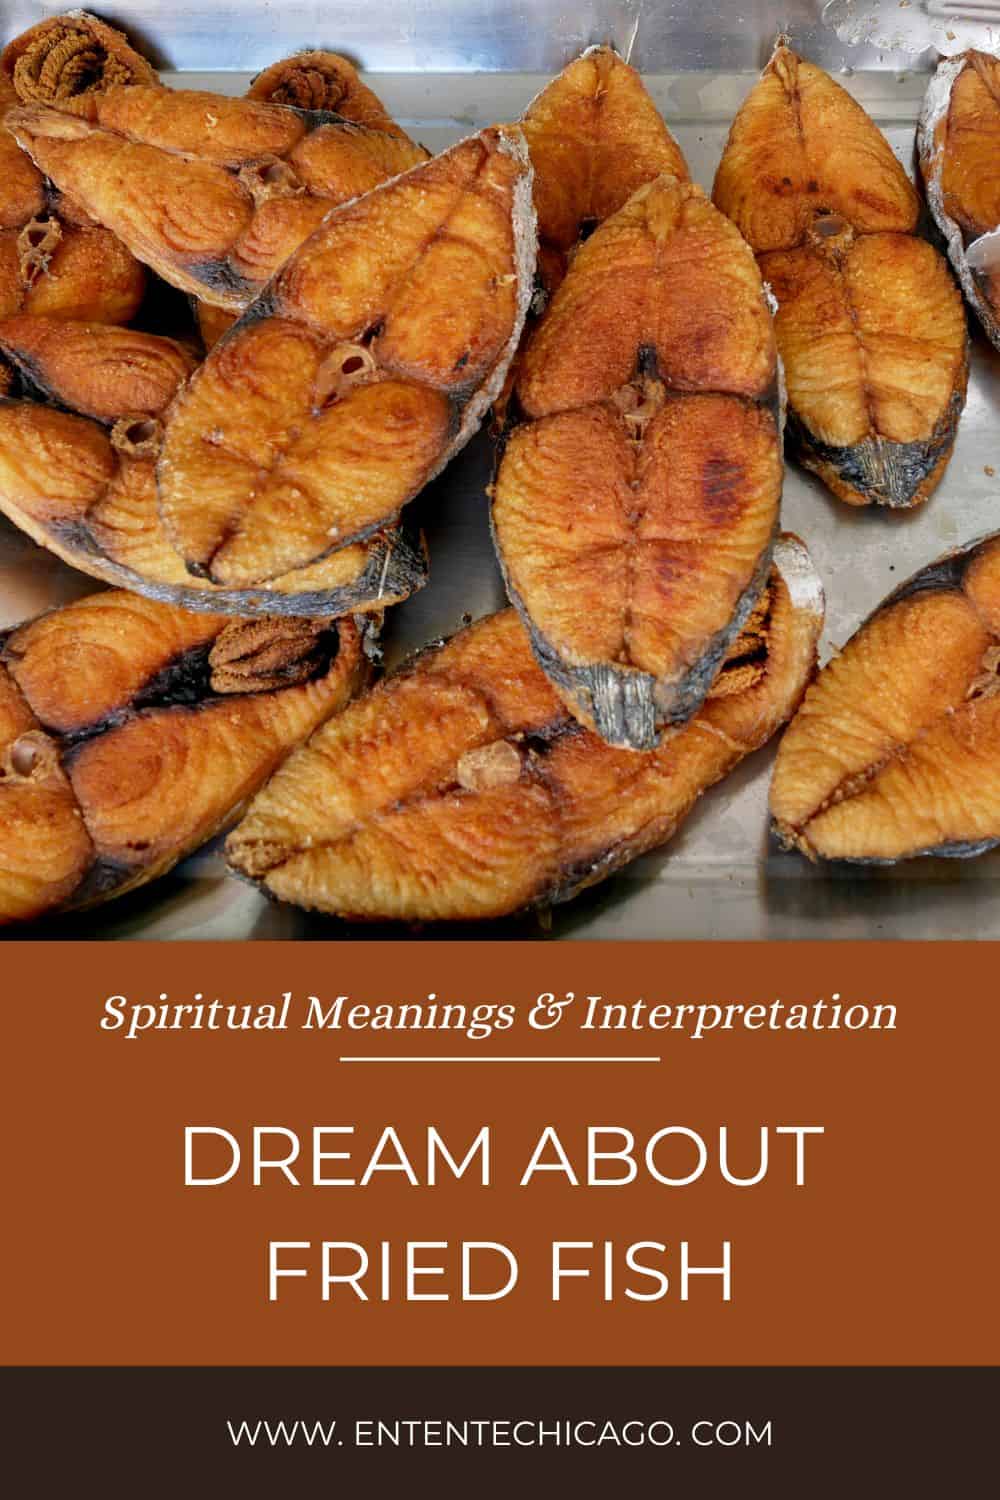 Dream About Fried Fish (Spiritual Meanings & Interpretation)